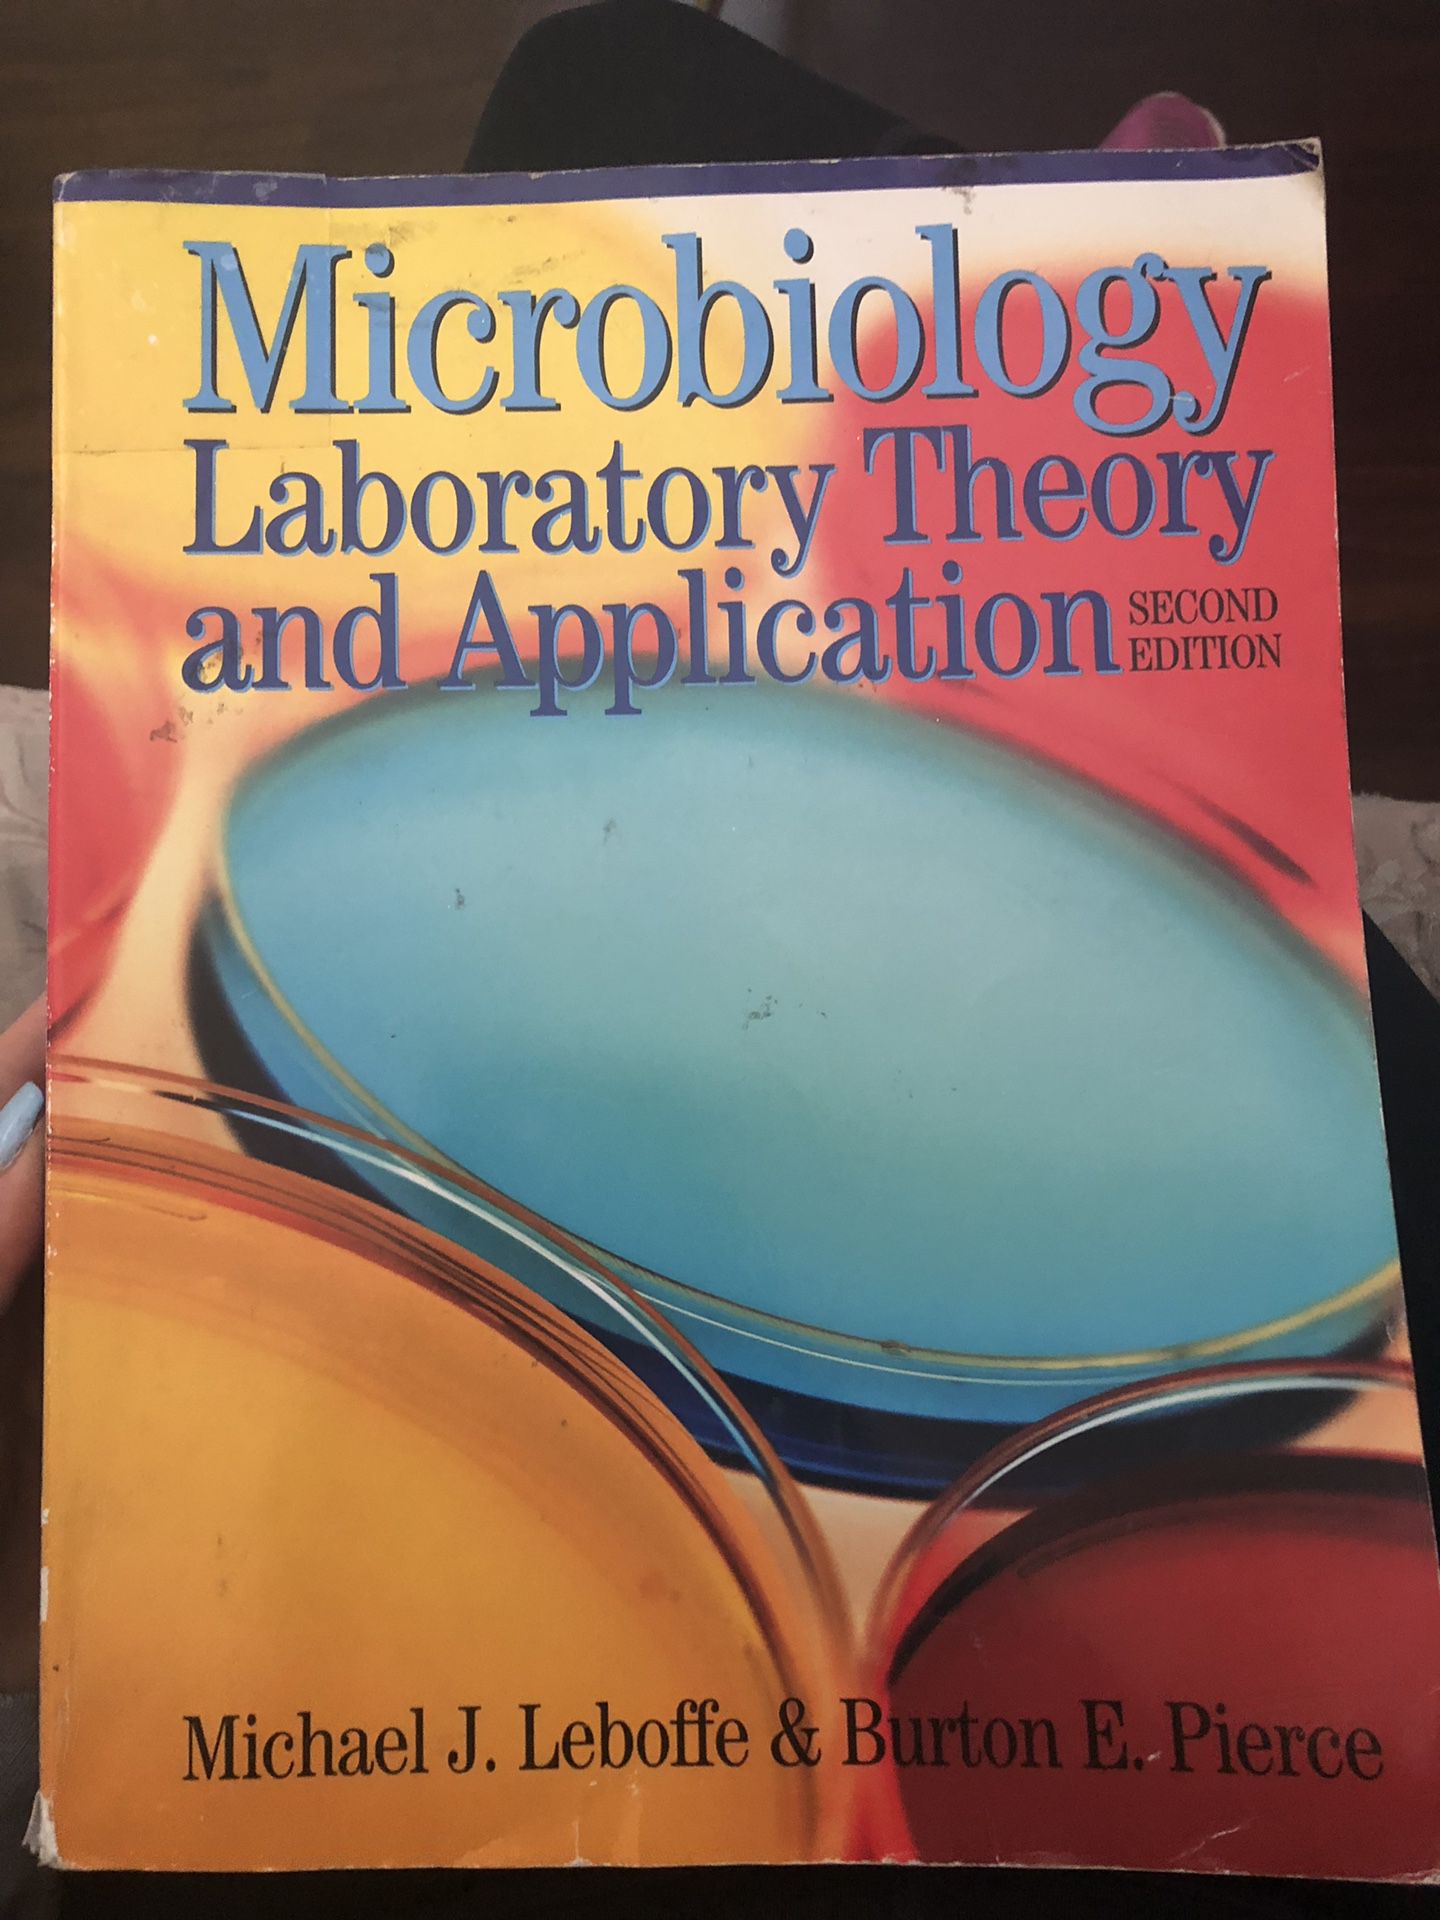 Microbiology lab theory and application second edition